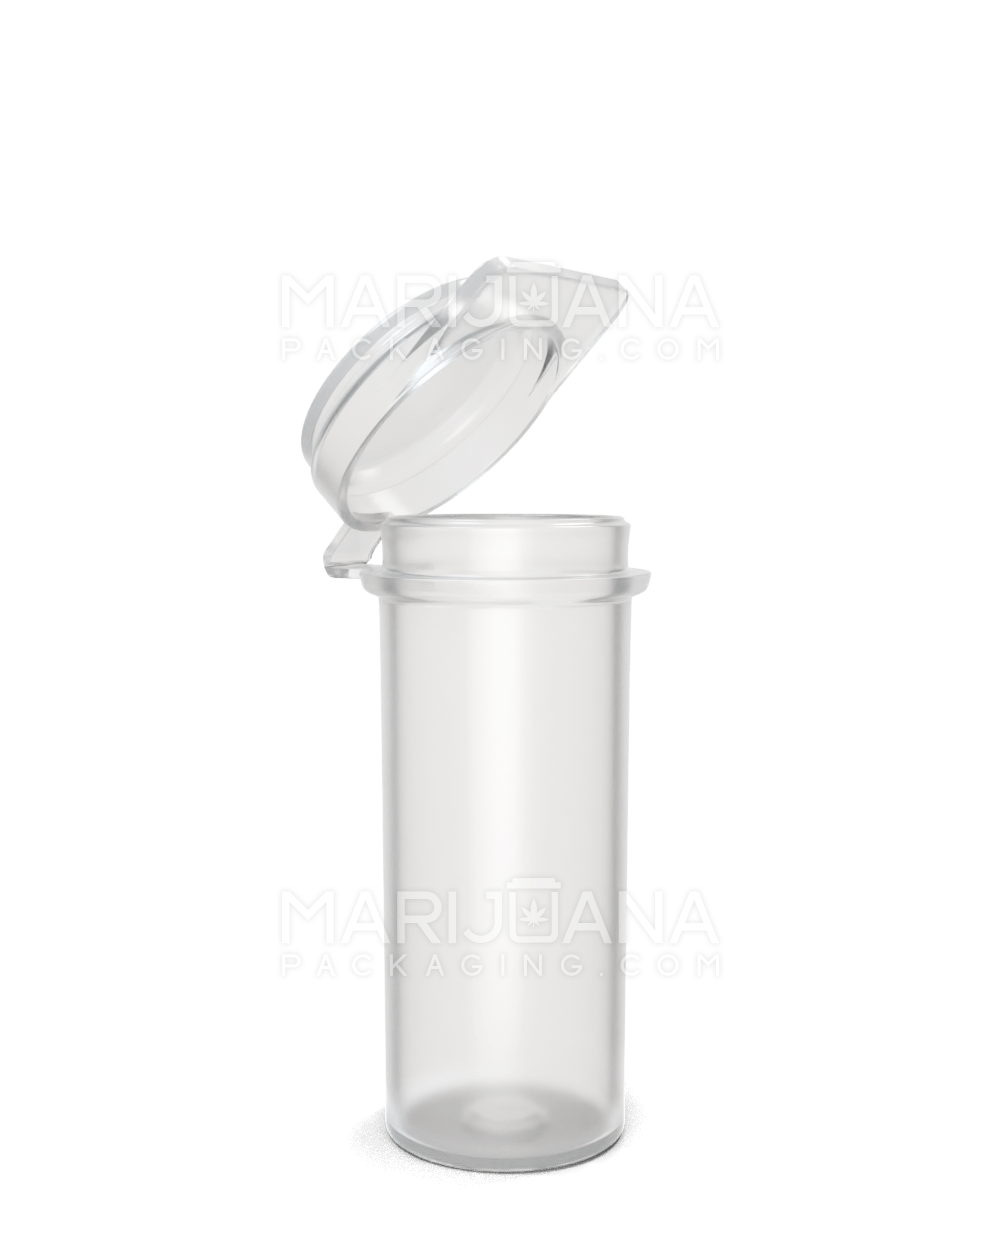 Hinged Lid Pop Top Plastic Seed Container Vial | 9 Dram - Clear | Sample - 1